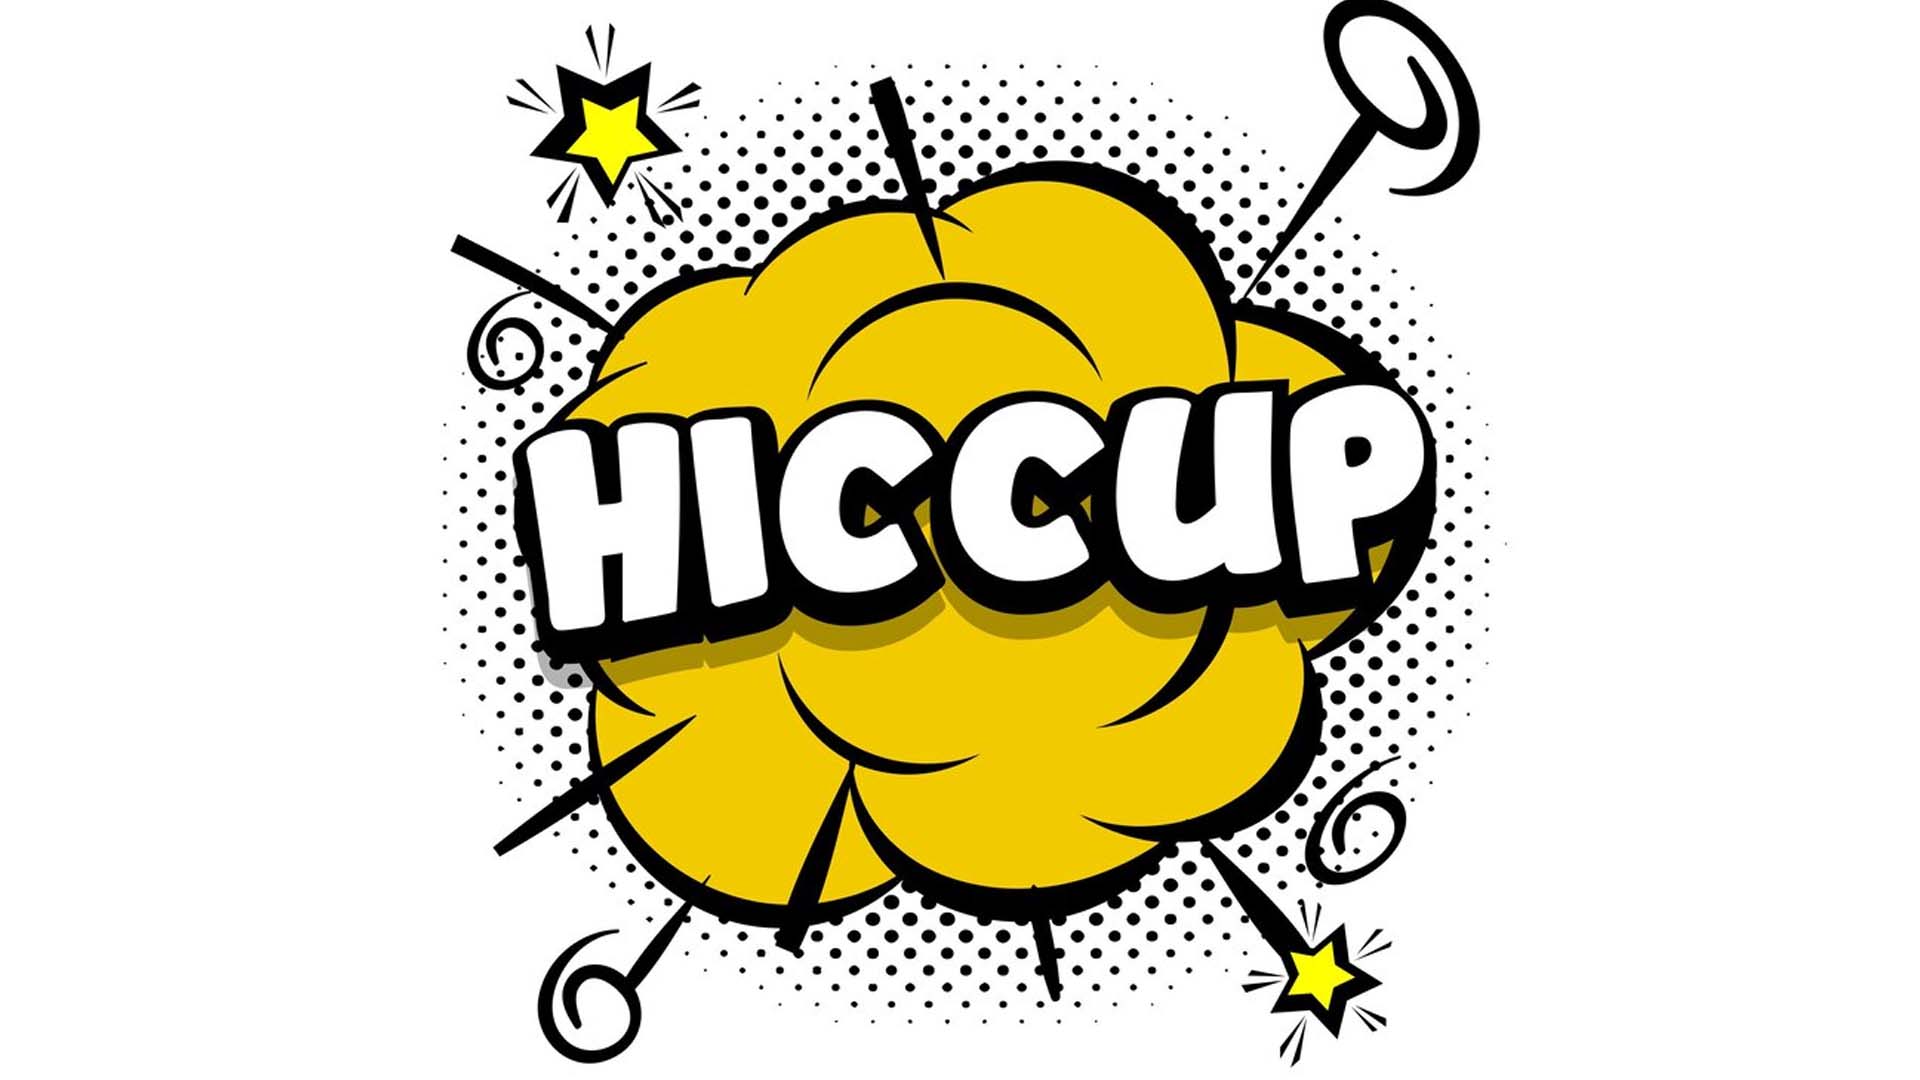 Hiccup written